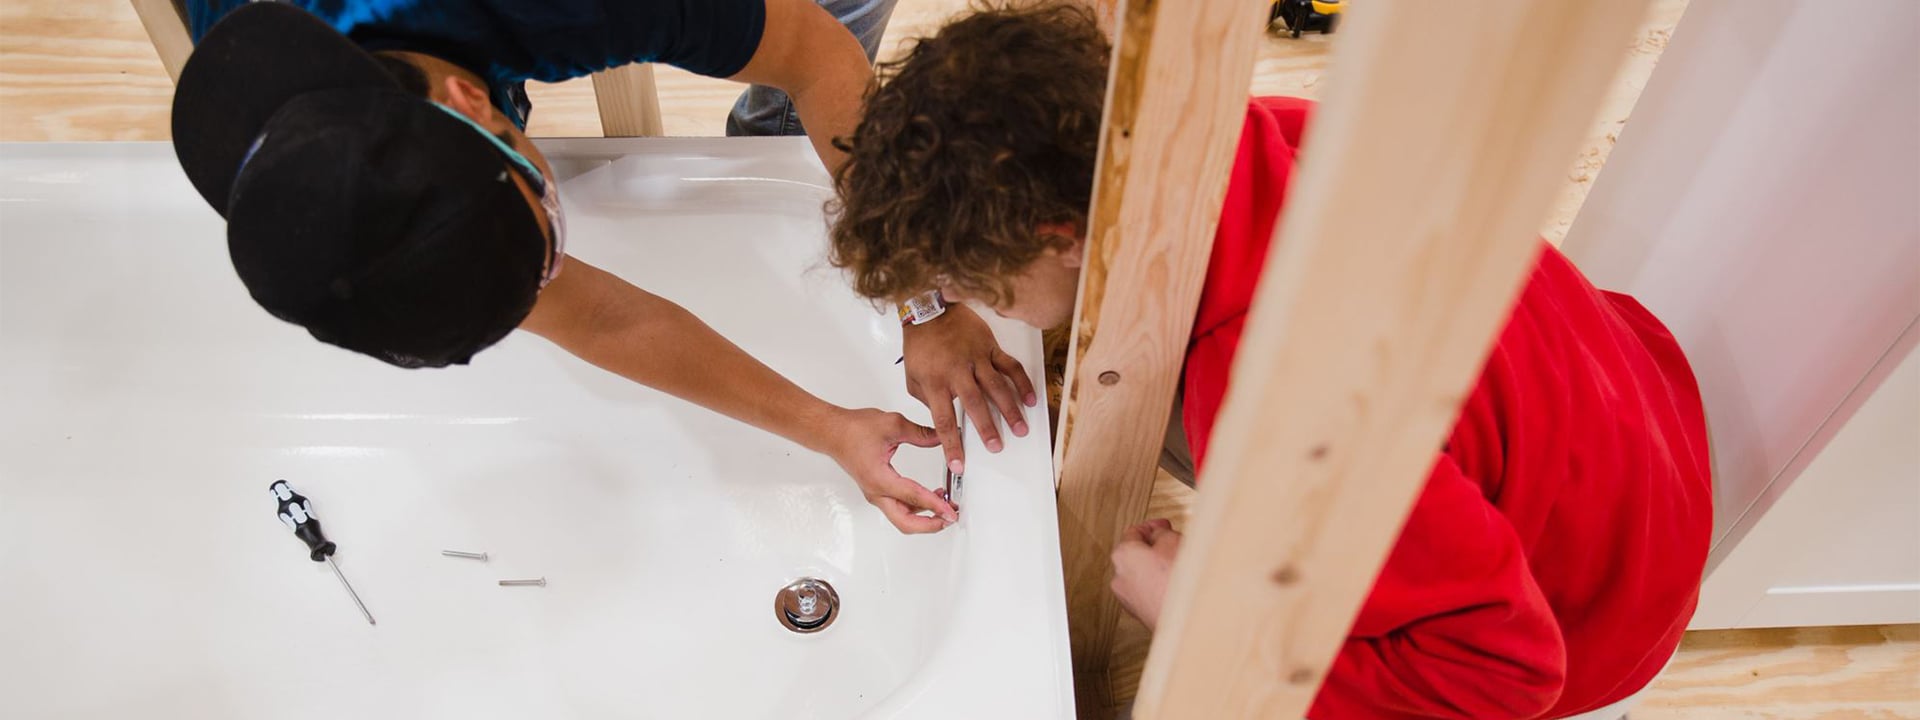 Two students work to install plumbing for a tub